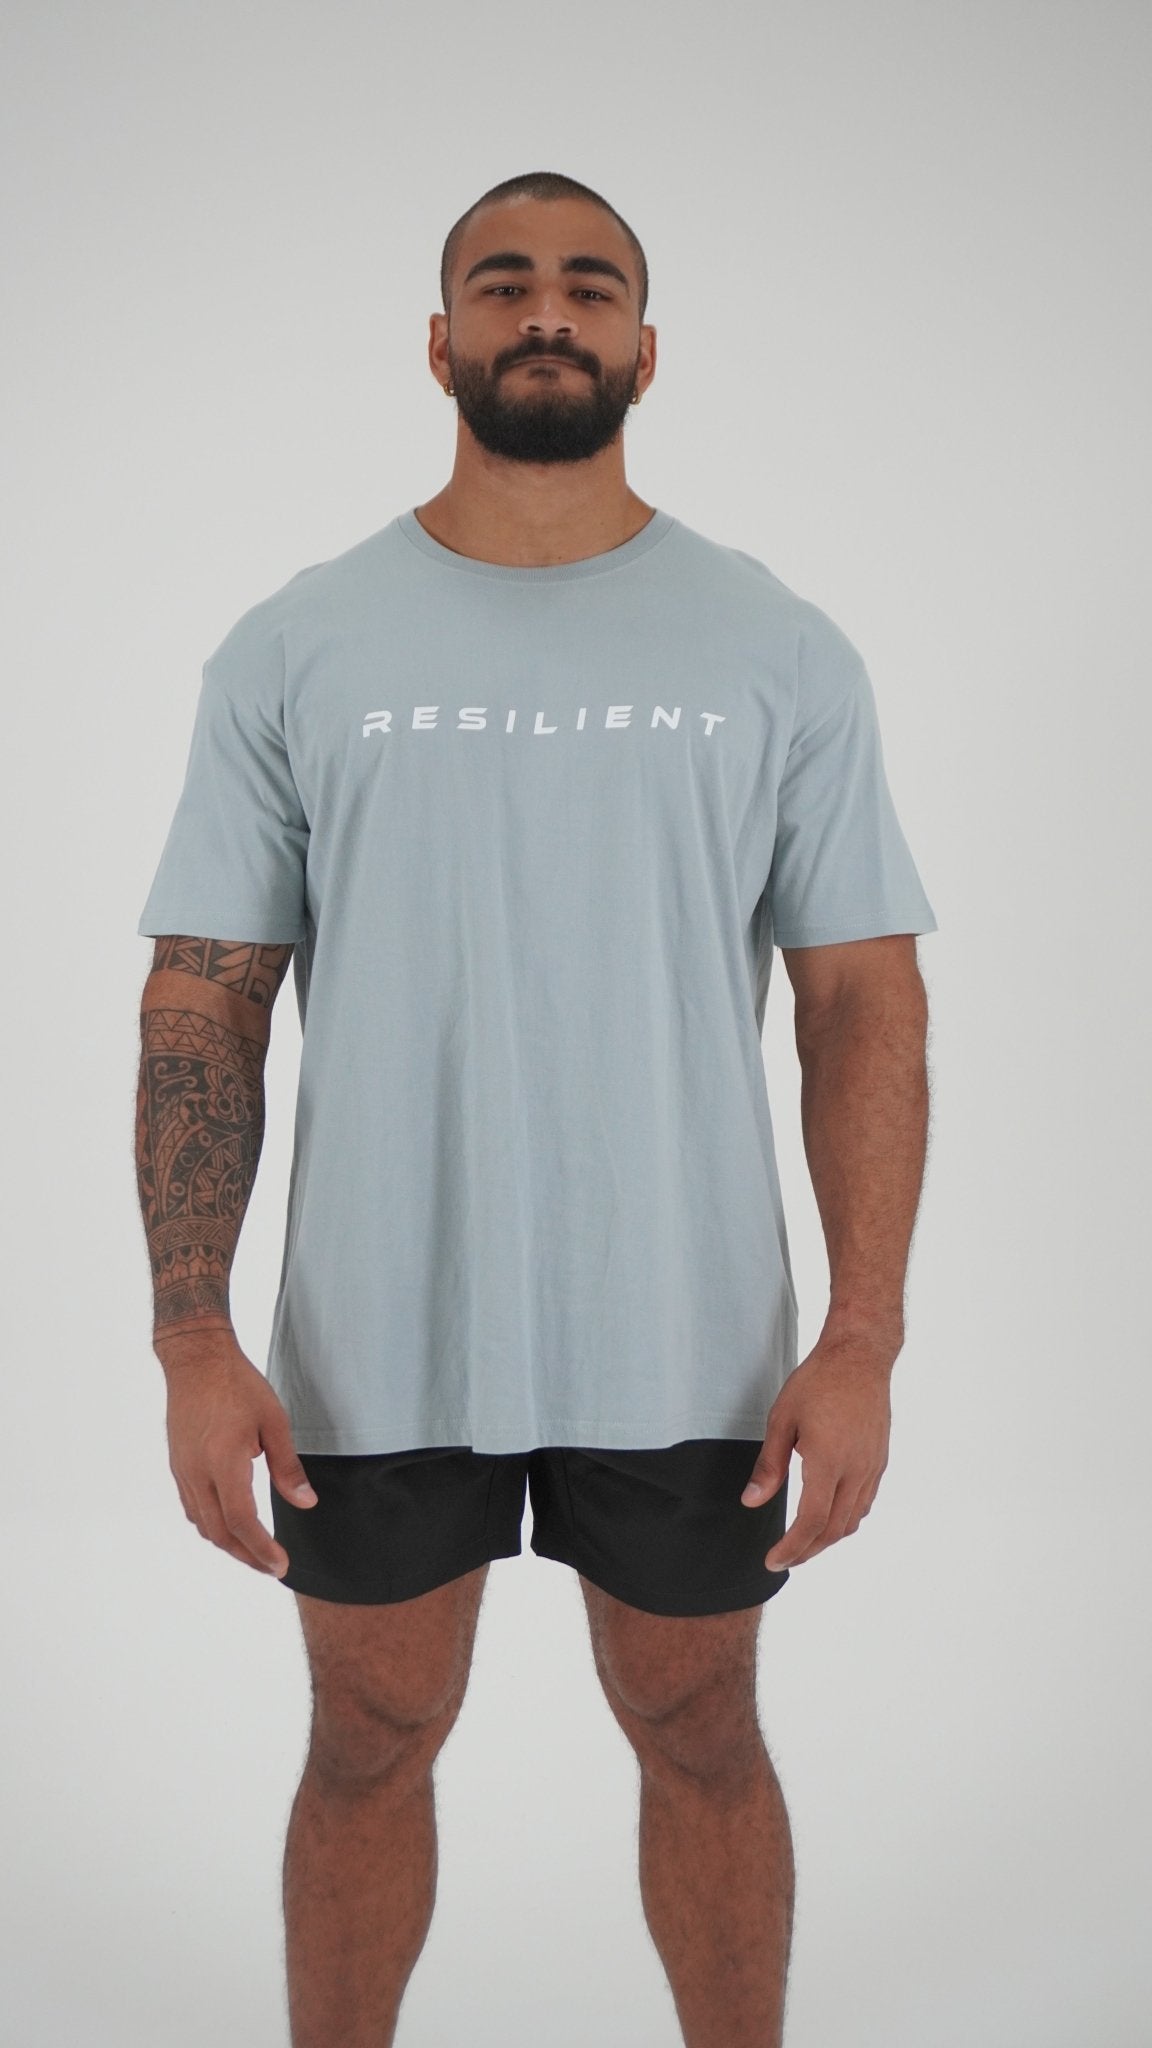 UltraRelax Tee - Resilient Active